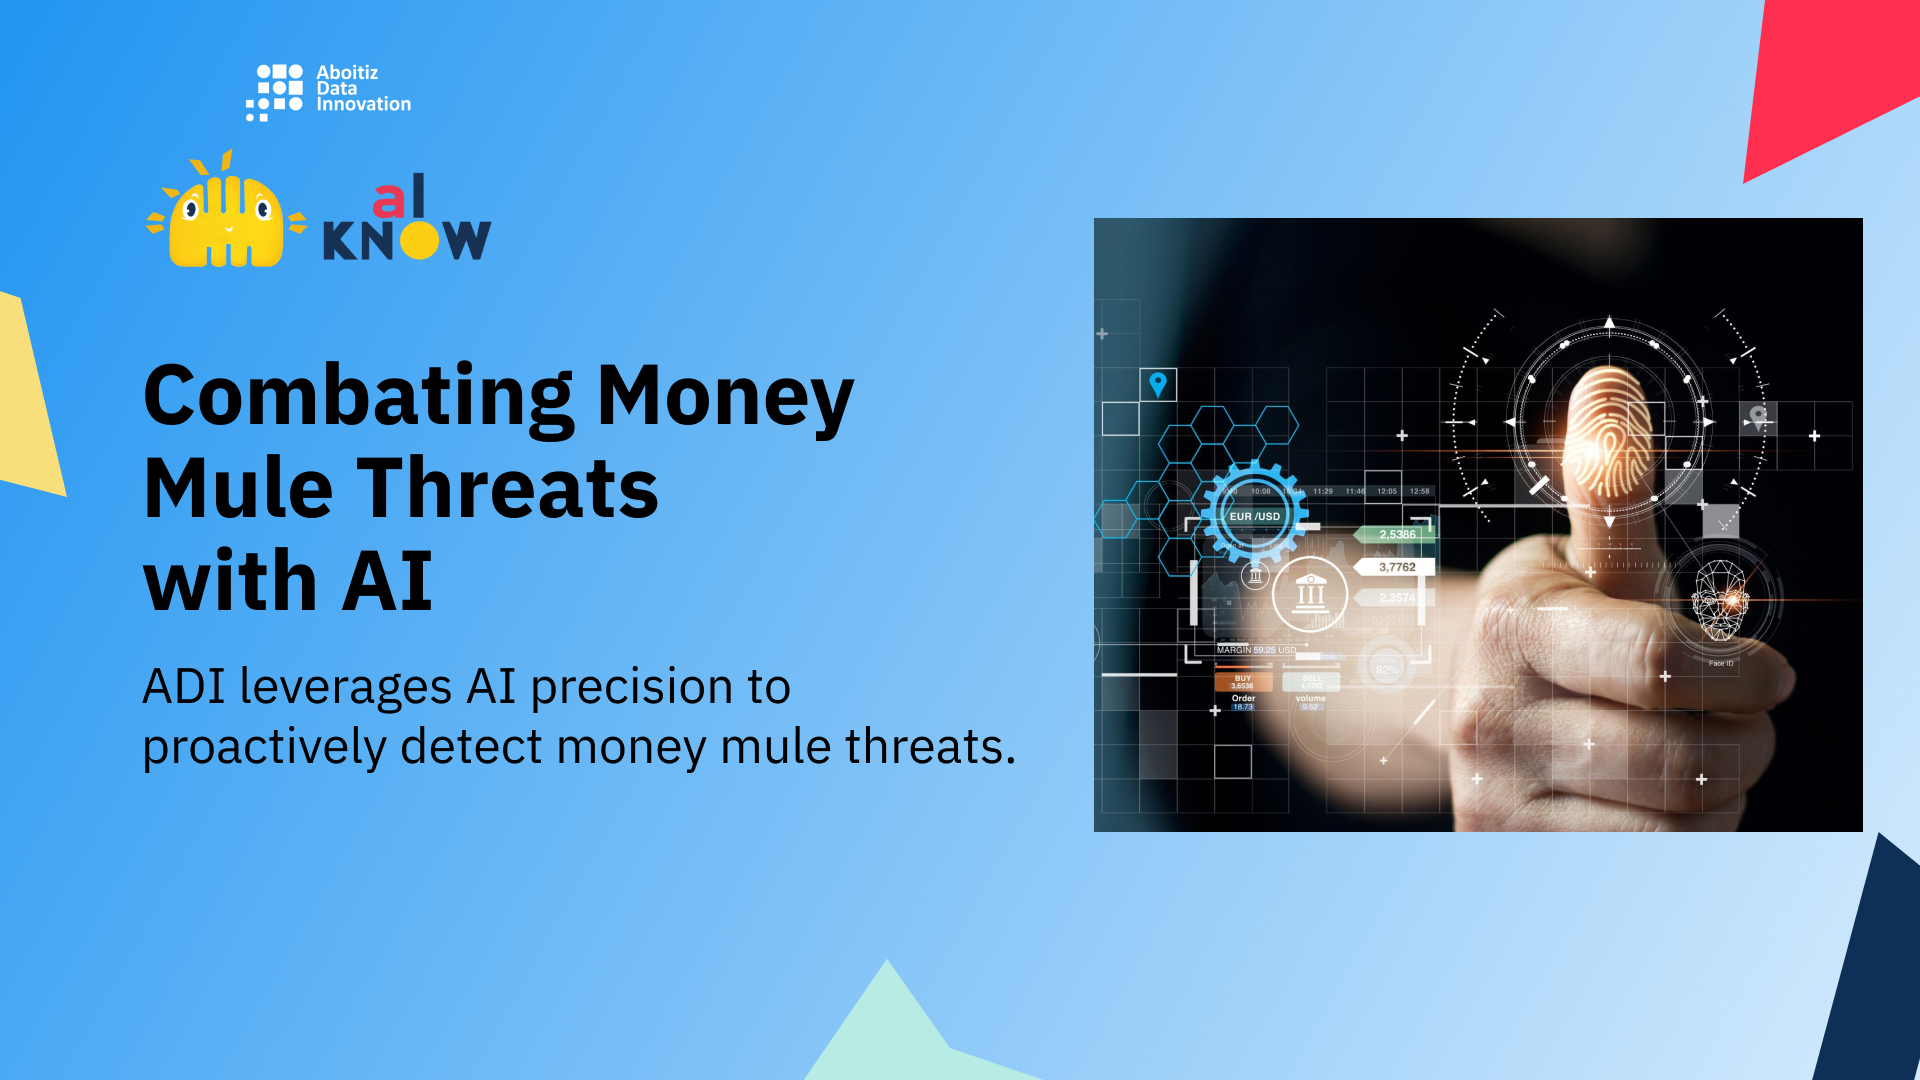 Combating Money Mule Threats with AI